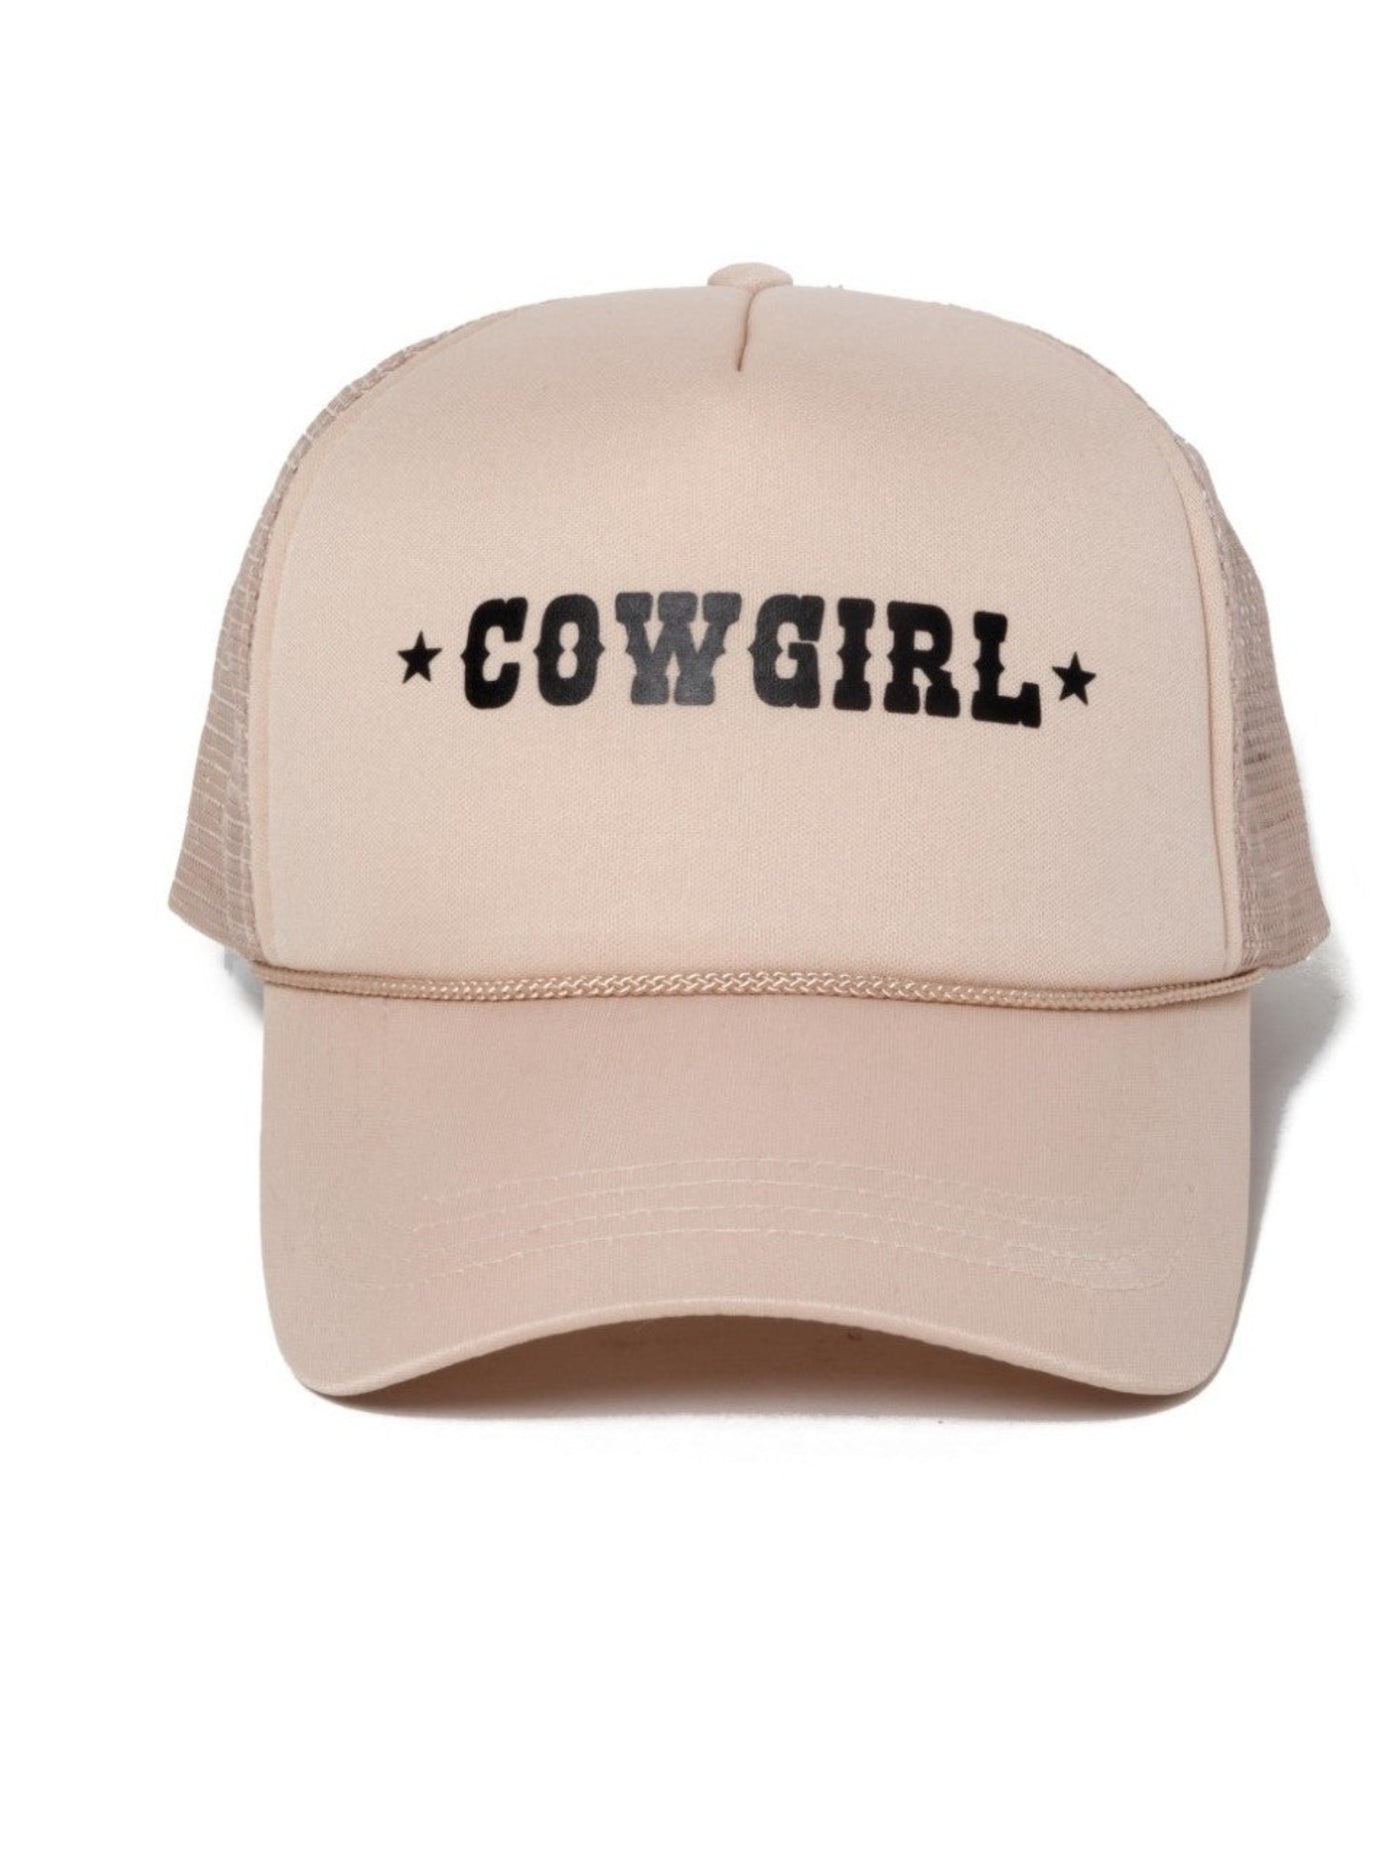 Cowgirl Trucker Hat, Taupe